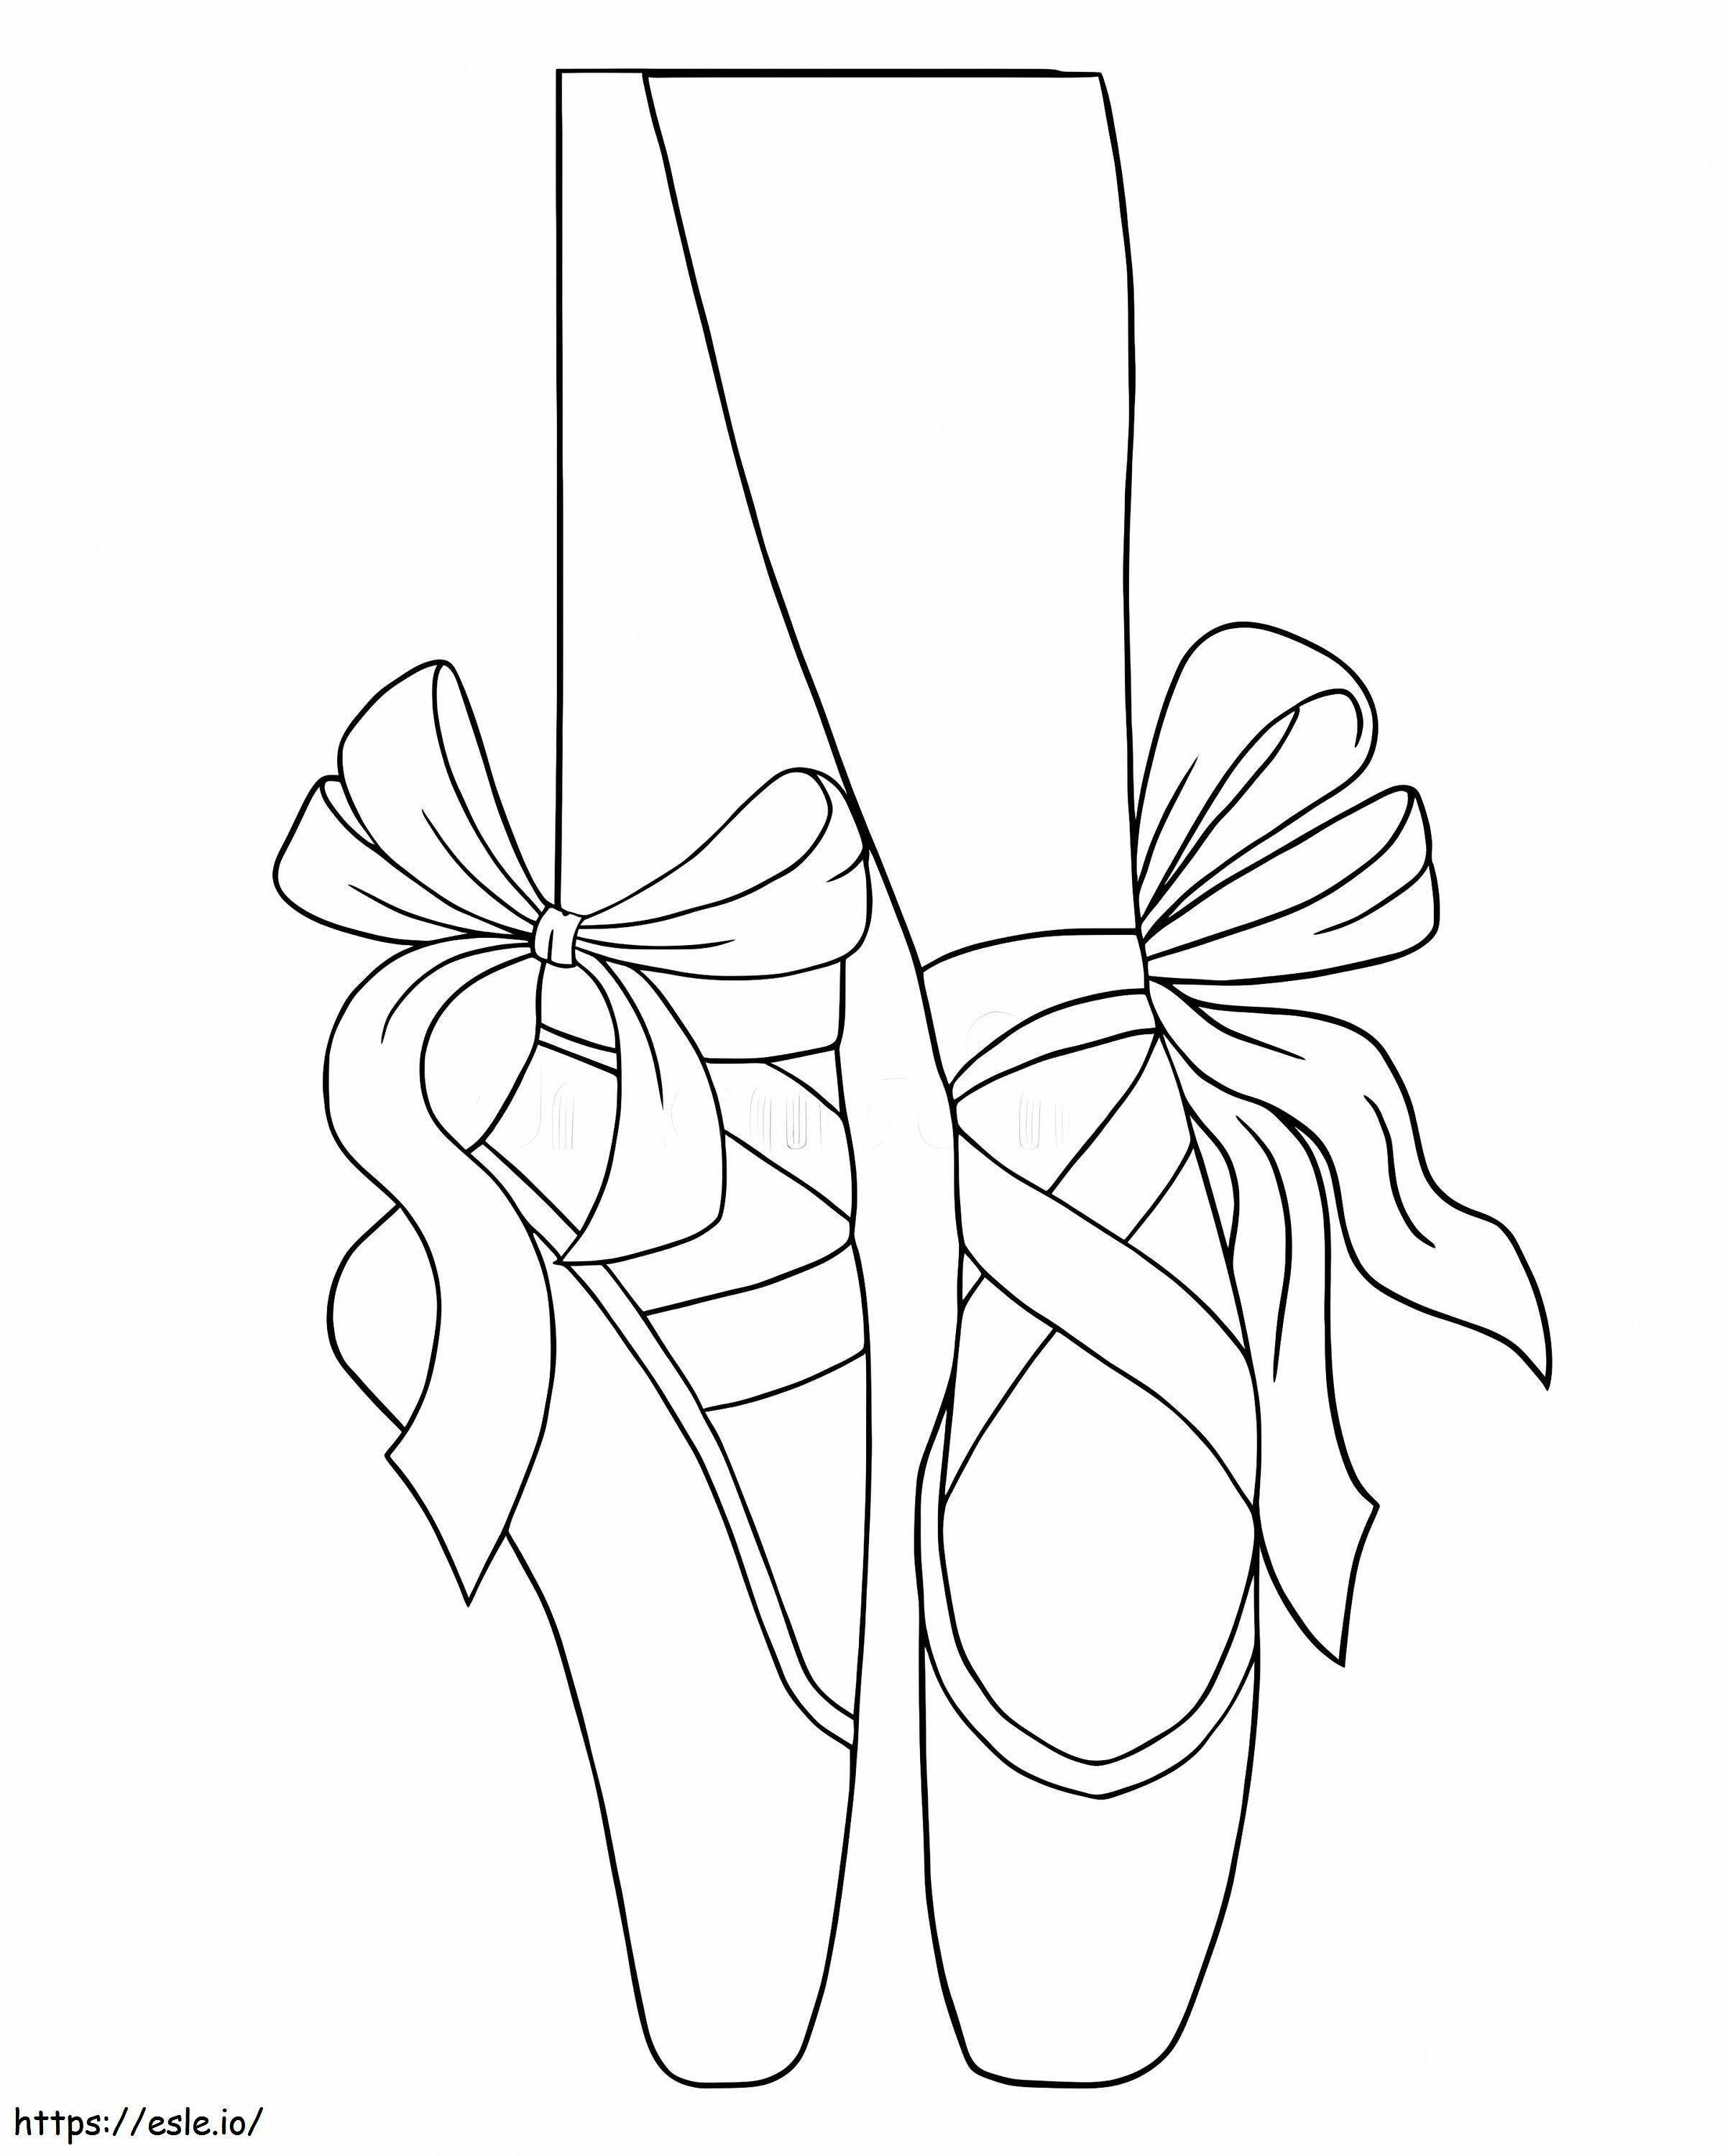 Shoes With Feet coloring page